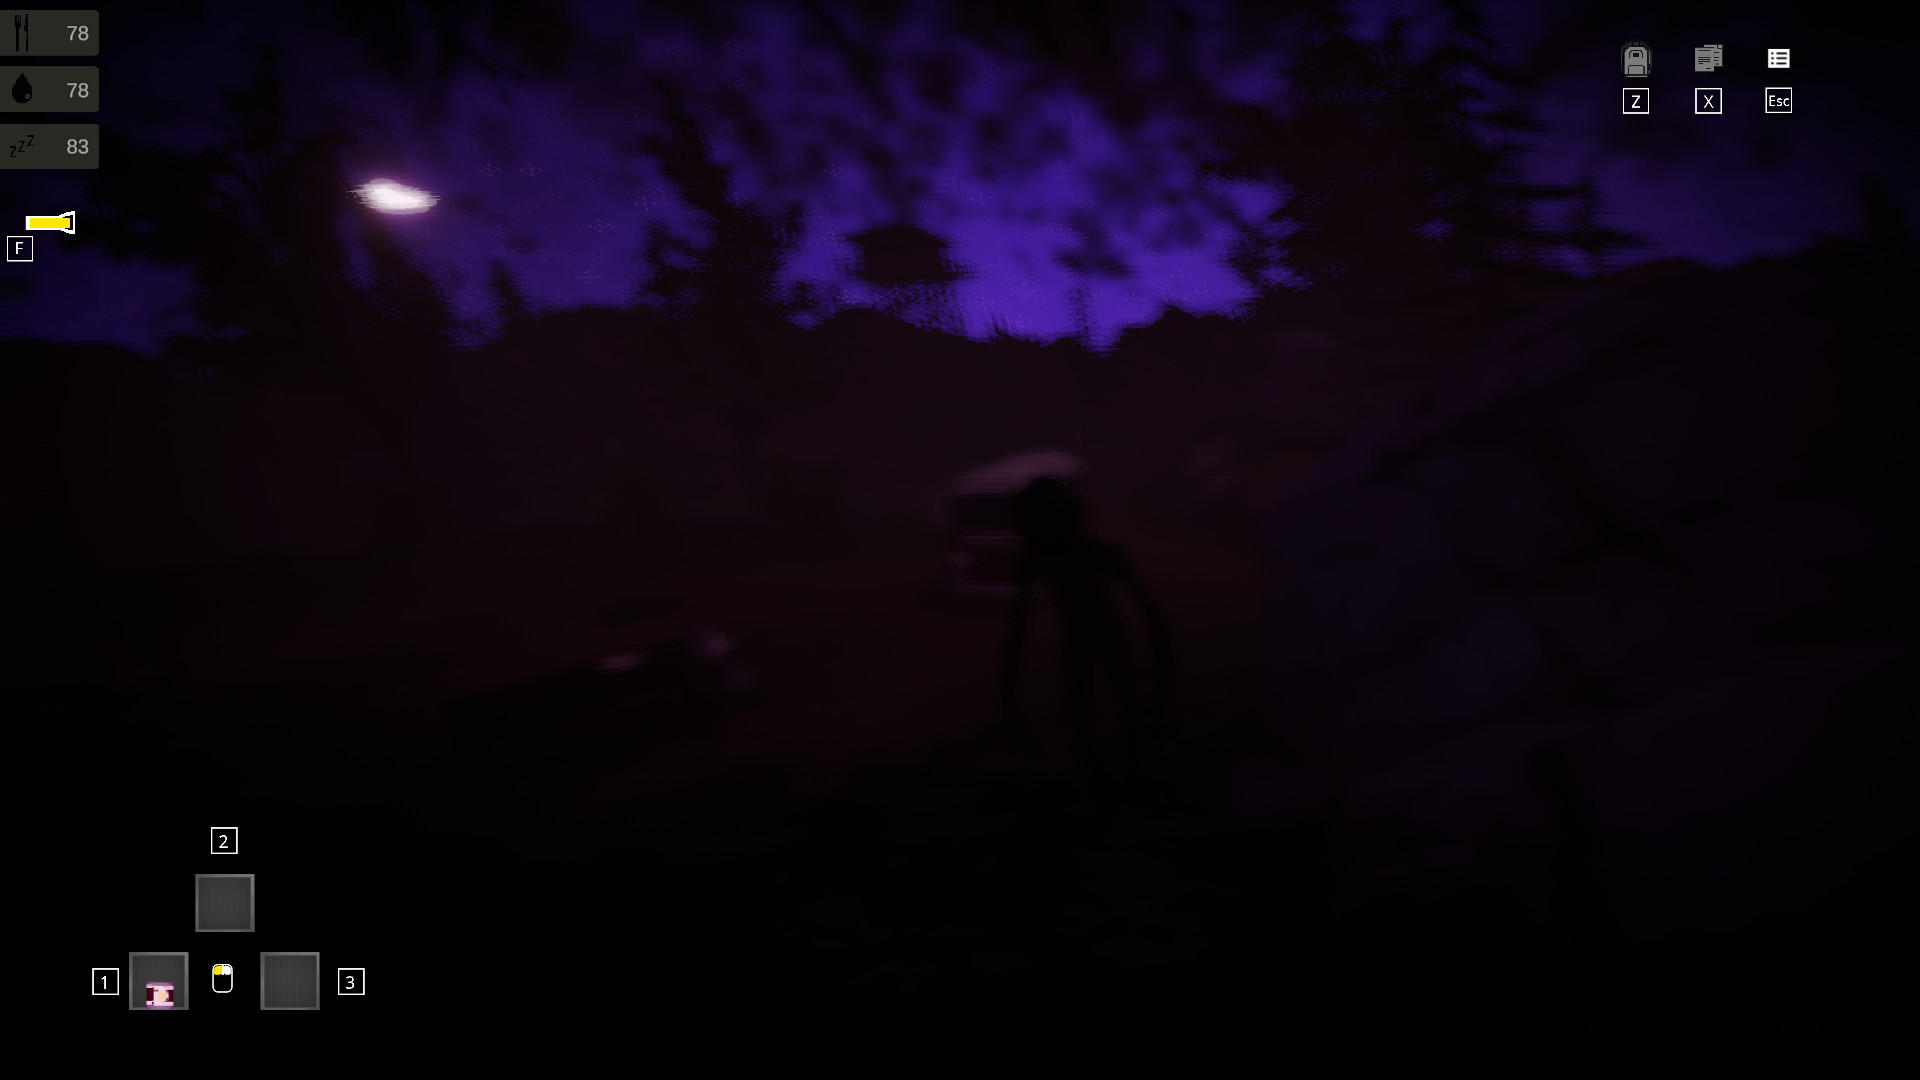 Abducted: The Night Hunters screenshot